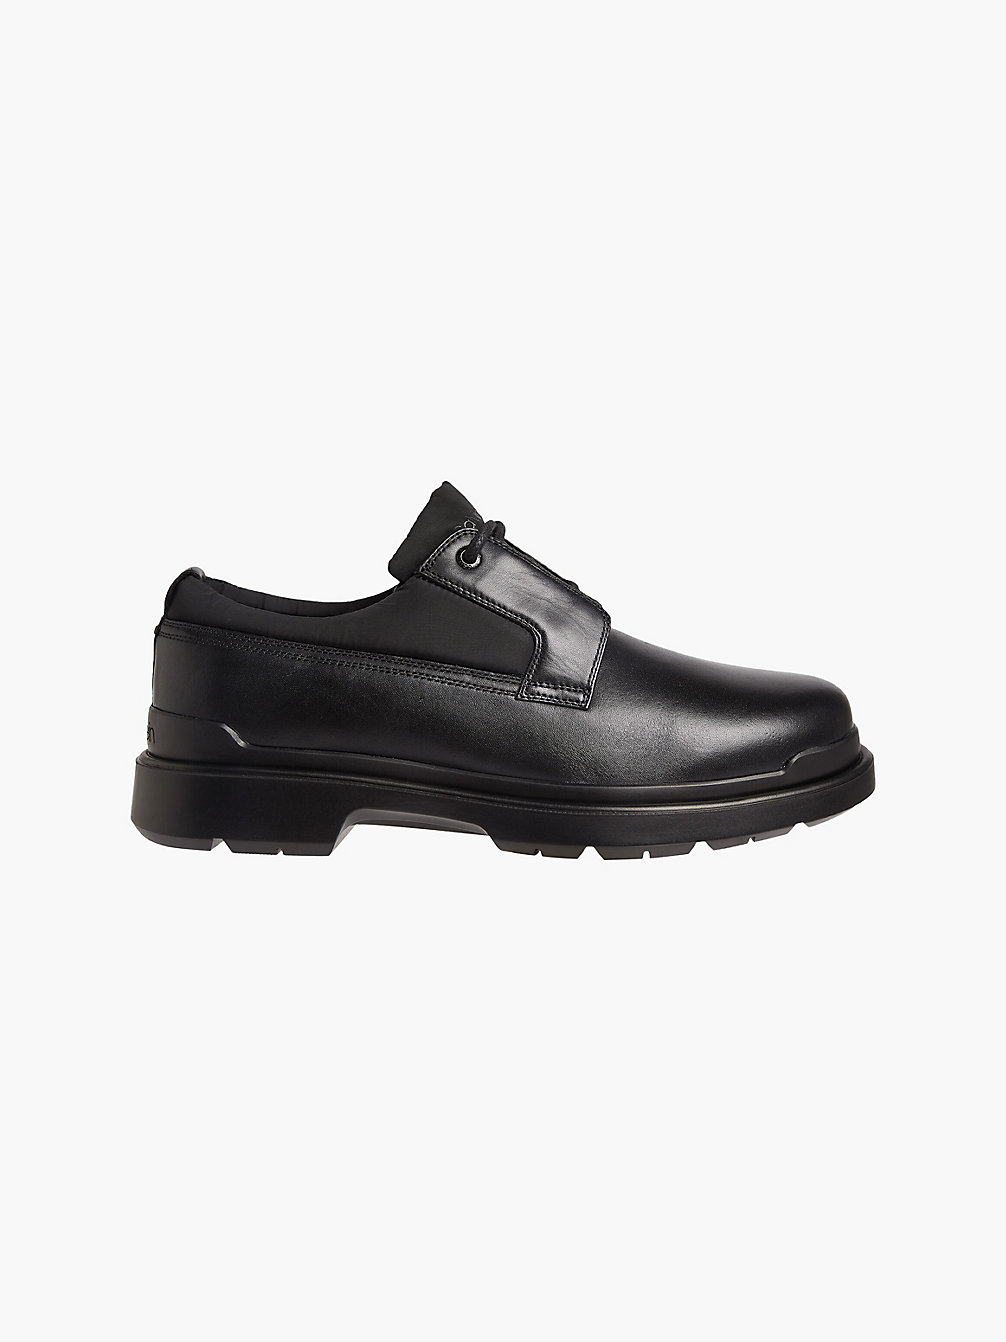 PVH BLACK Leather And Recycled Nylon Lace-Up Shoes undefined men Calvin Klein